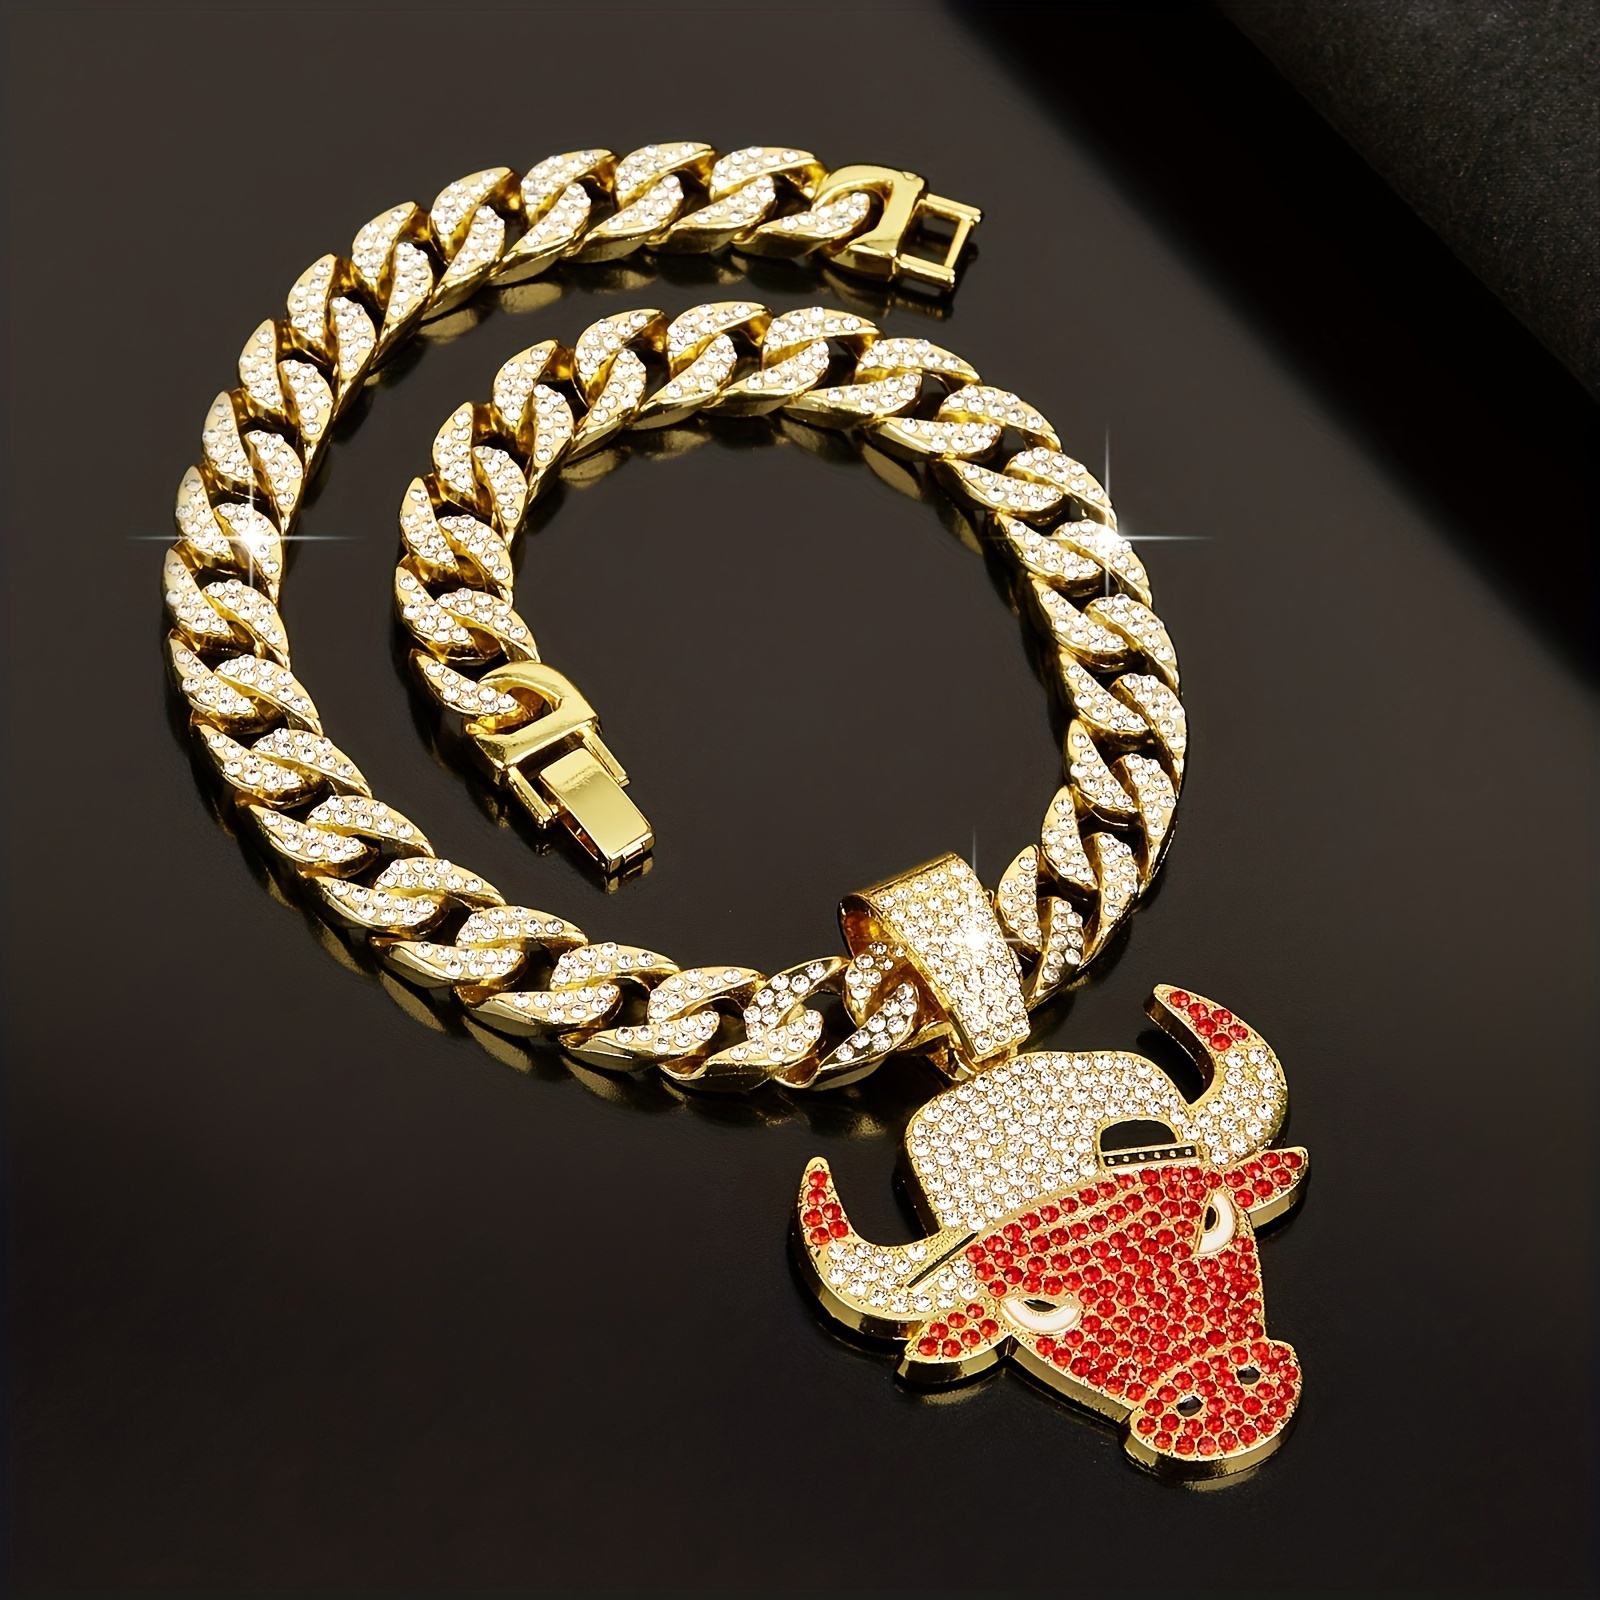 

Men's Hip-hop Fashion Golden Zircon Pendant Necklace, Necklace Length:20inwidth:0.5in, Gift Box